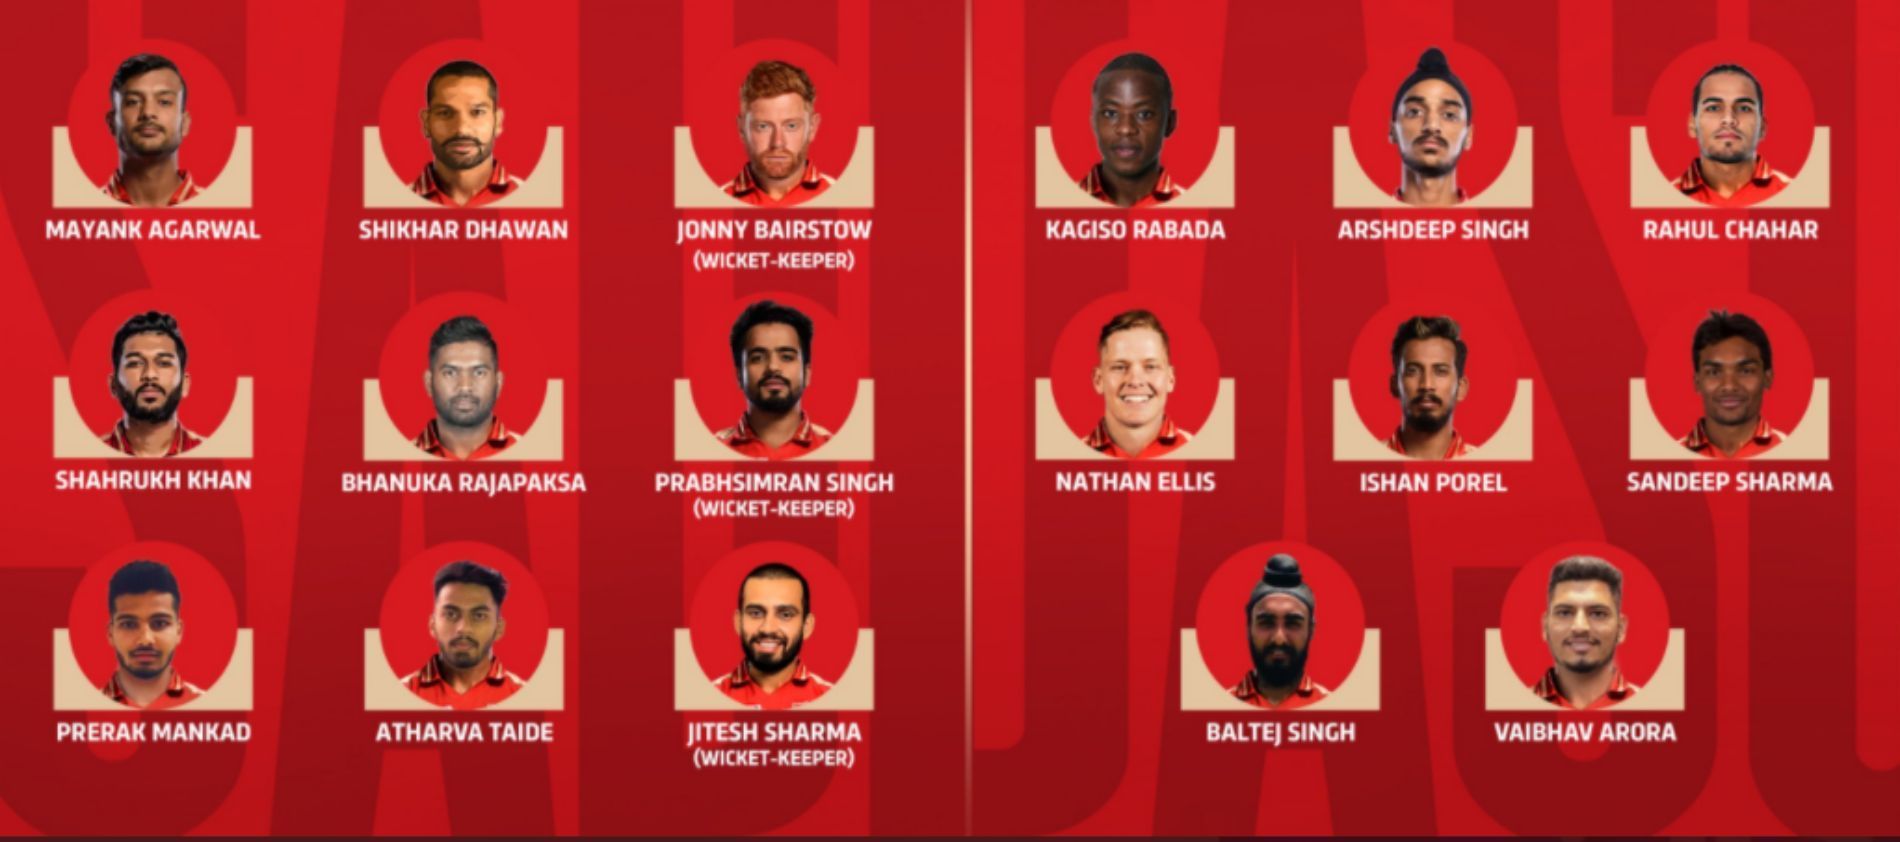 Some of the Punjab Kings (PBKS) players picked at the IPL 2022 auction Pic: PBKS/ Twitter